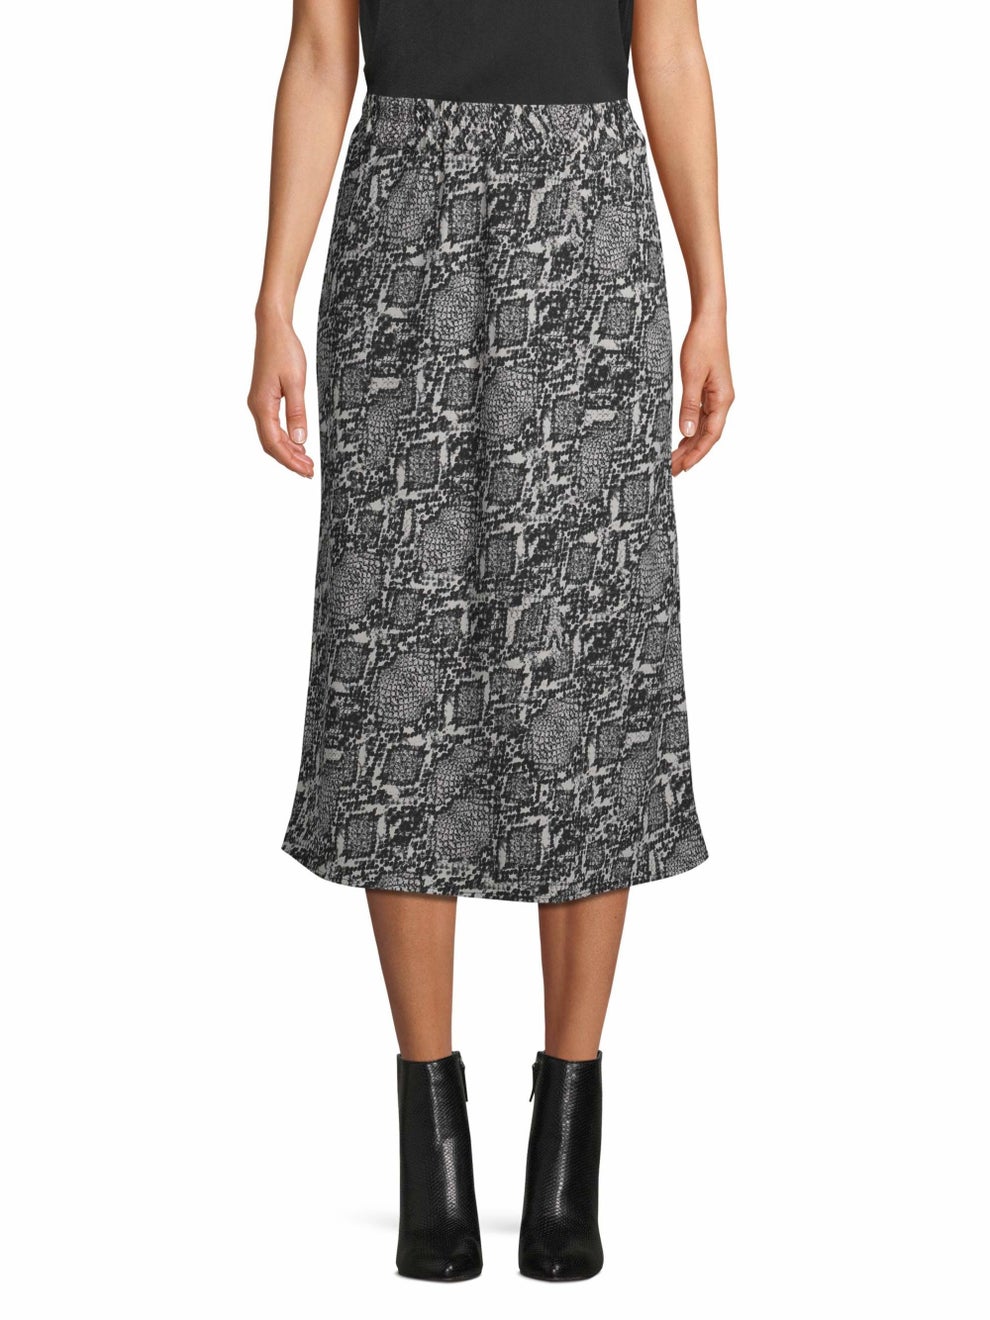 32 Stunning Skirts For People Who Loathe Pants